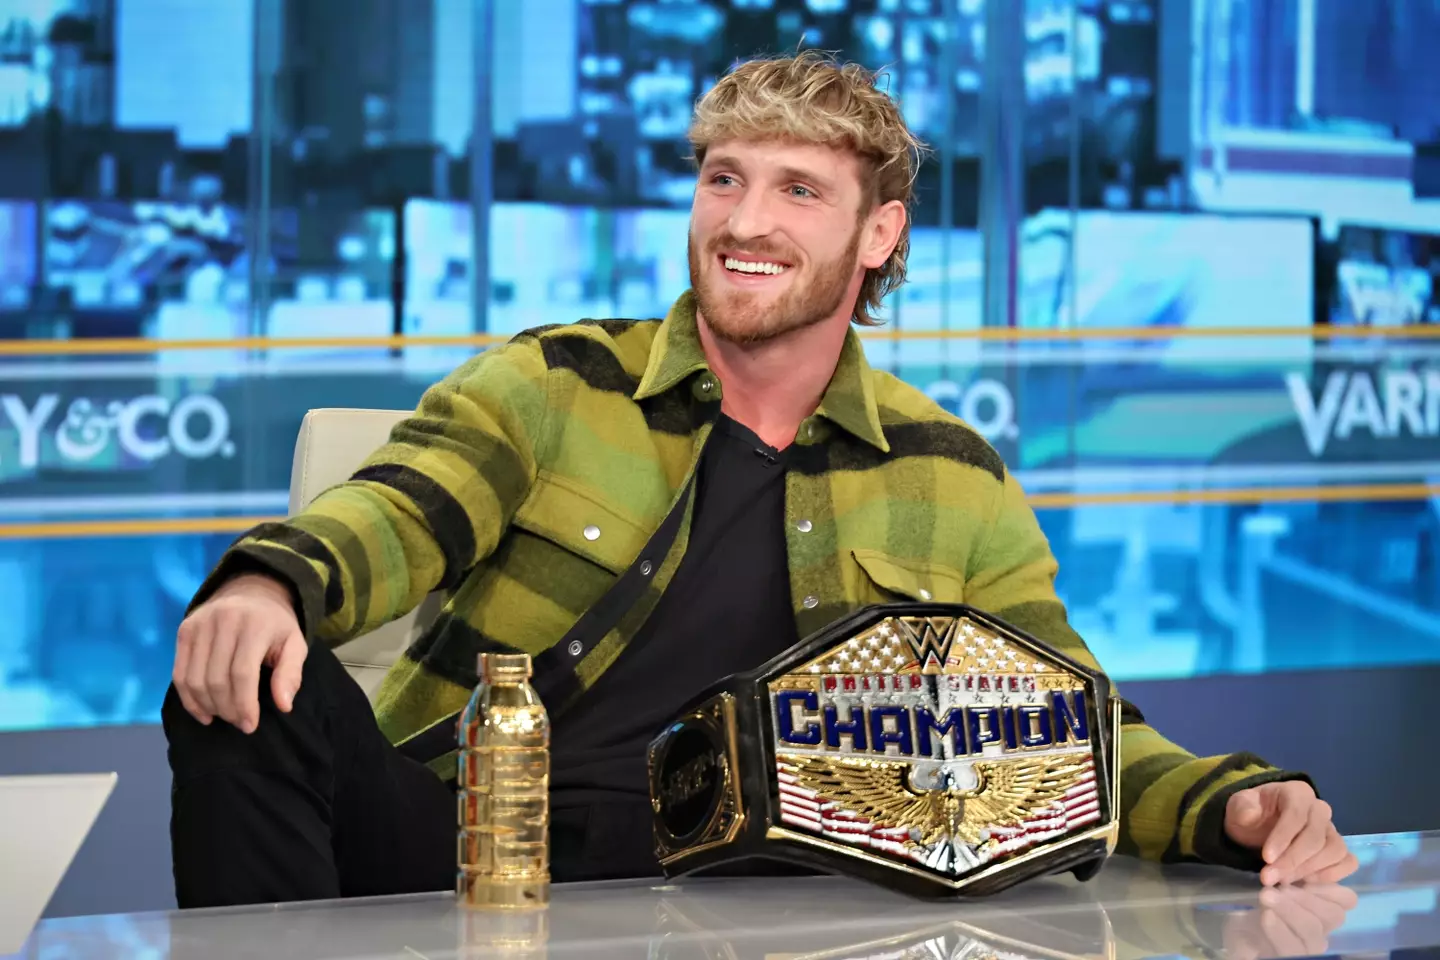 Paul with his United States Championship during a media appearance. (Image